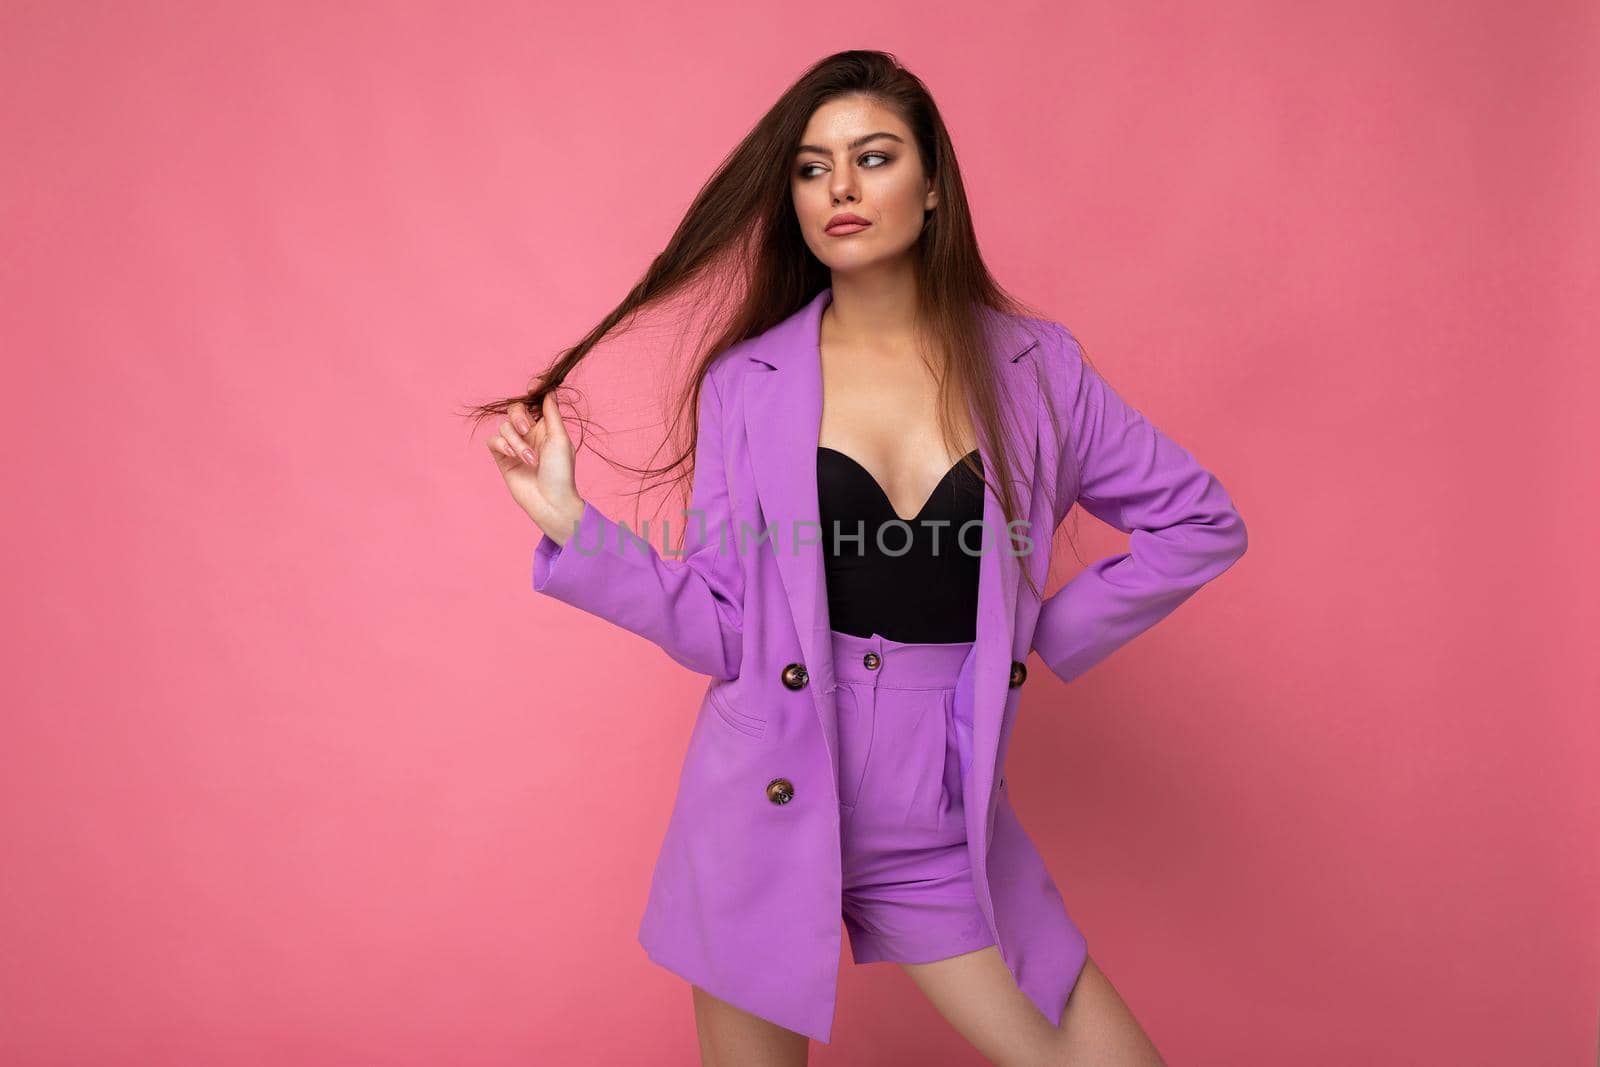 Portrait of young sexy cool attractive fashionable brunette woman wearing stylish violet suit isolated on pink background with empty space. Business concept.